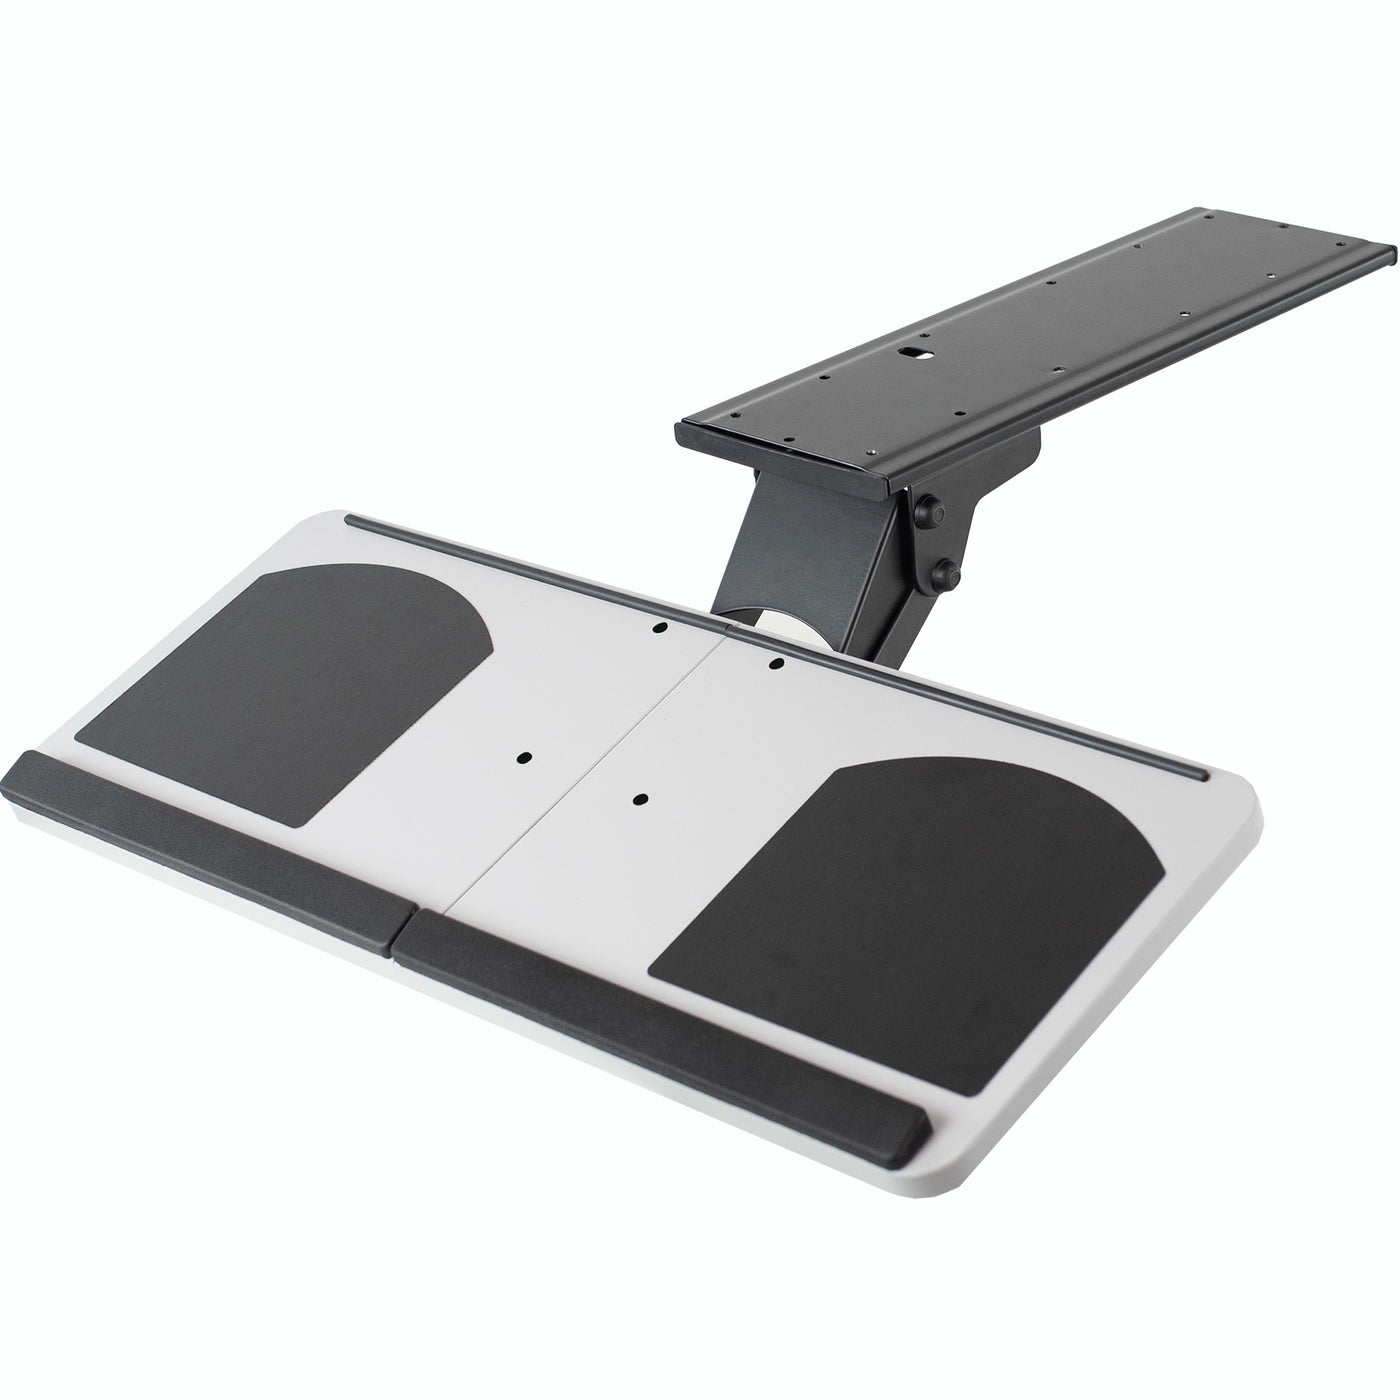 Black and white particle board keyboard tray from VIVO.